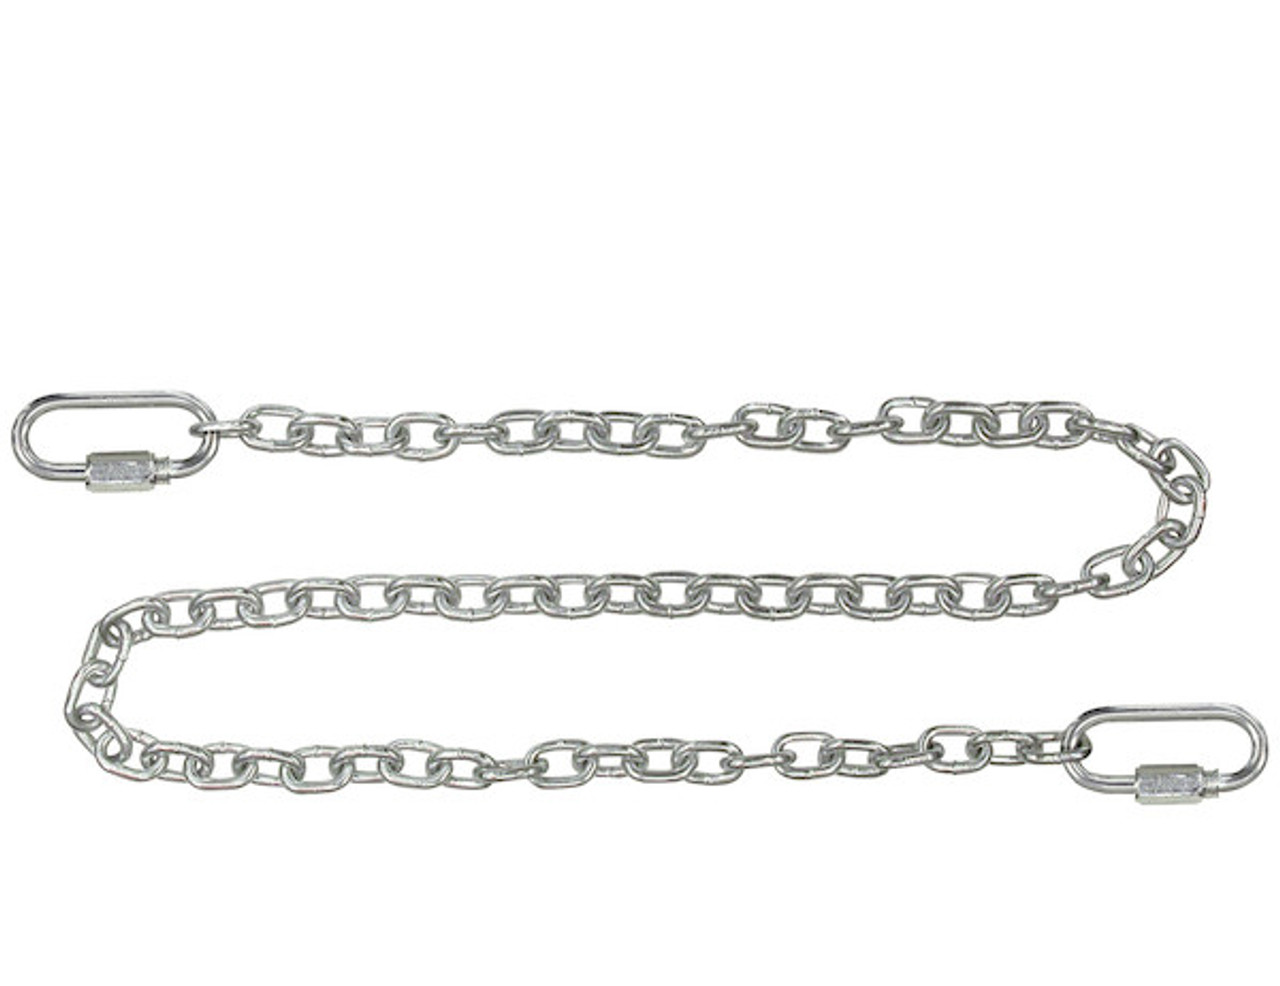 B93234SC - 9/32x34 Inch Class 2 Trailer Safety Chain With 2 Quick Link Connectors